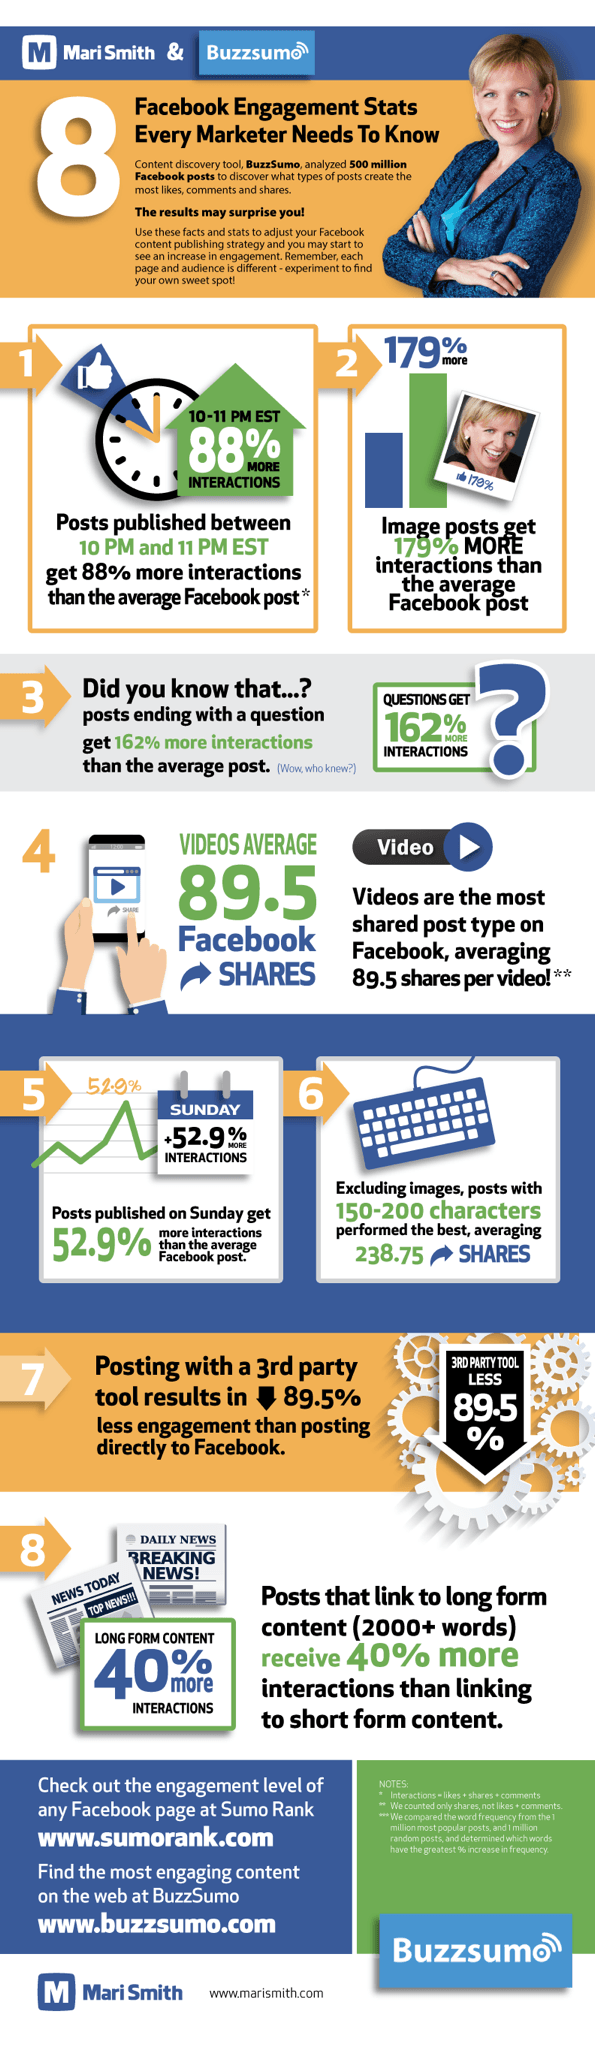 8 Ways to Increase Engagement on Facebook Infographic image